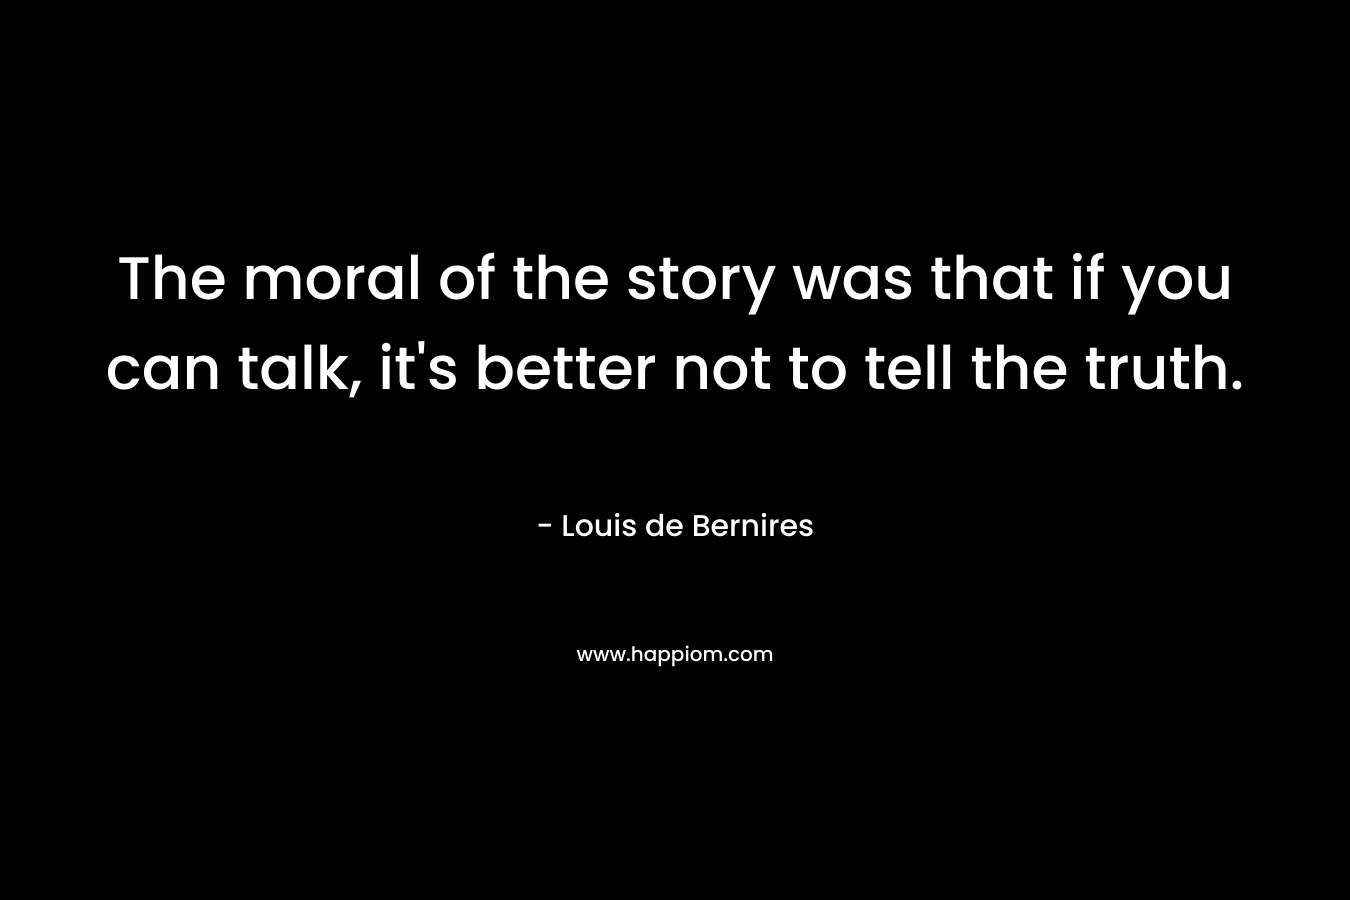 The moral of the story was that if you can talk, it's better not to tell the truth.